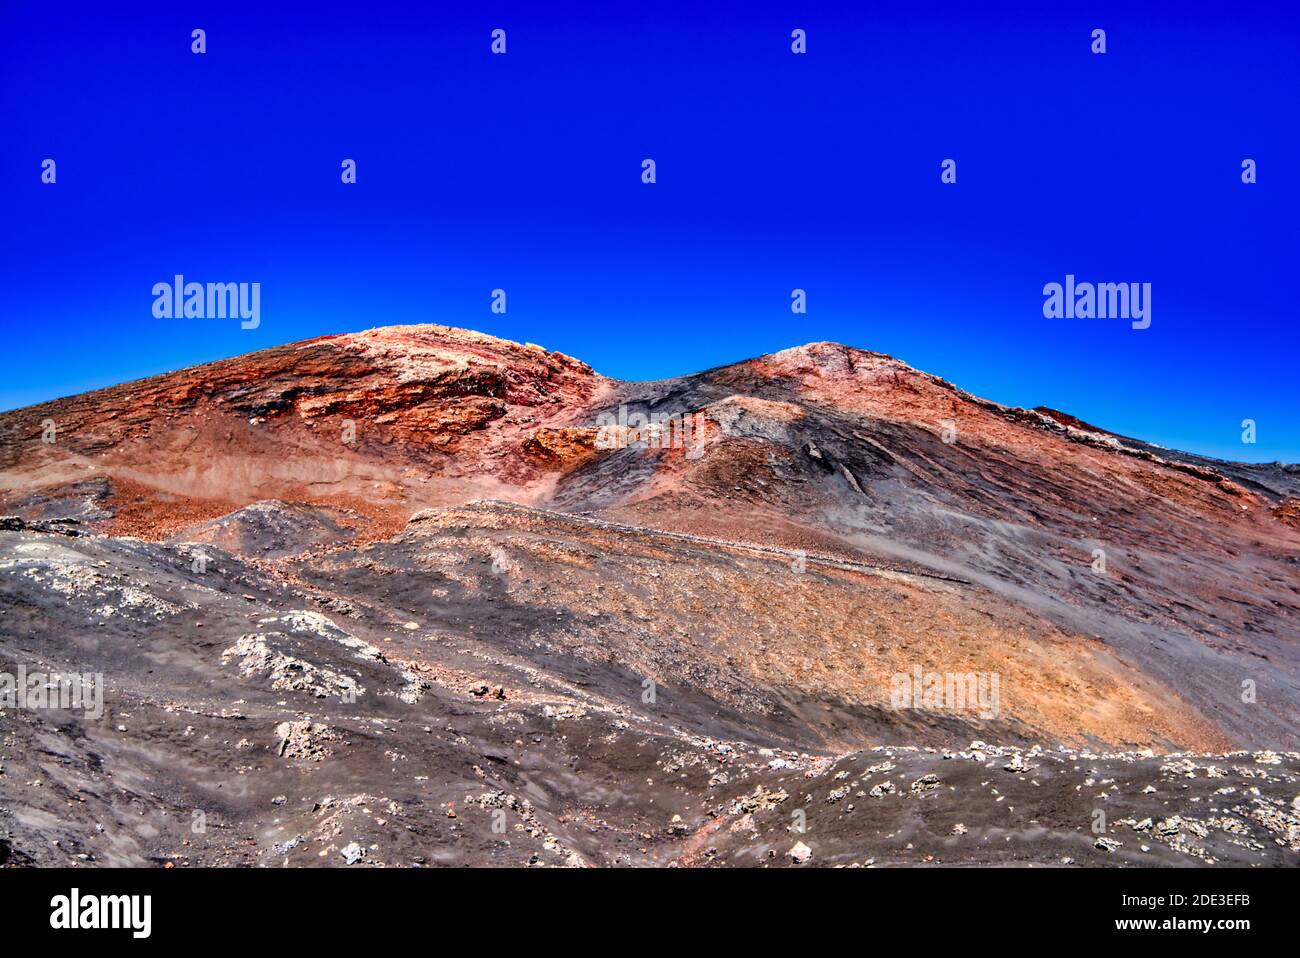 Mount Etna with blue blue sky Stock Photo